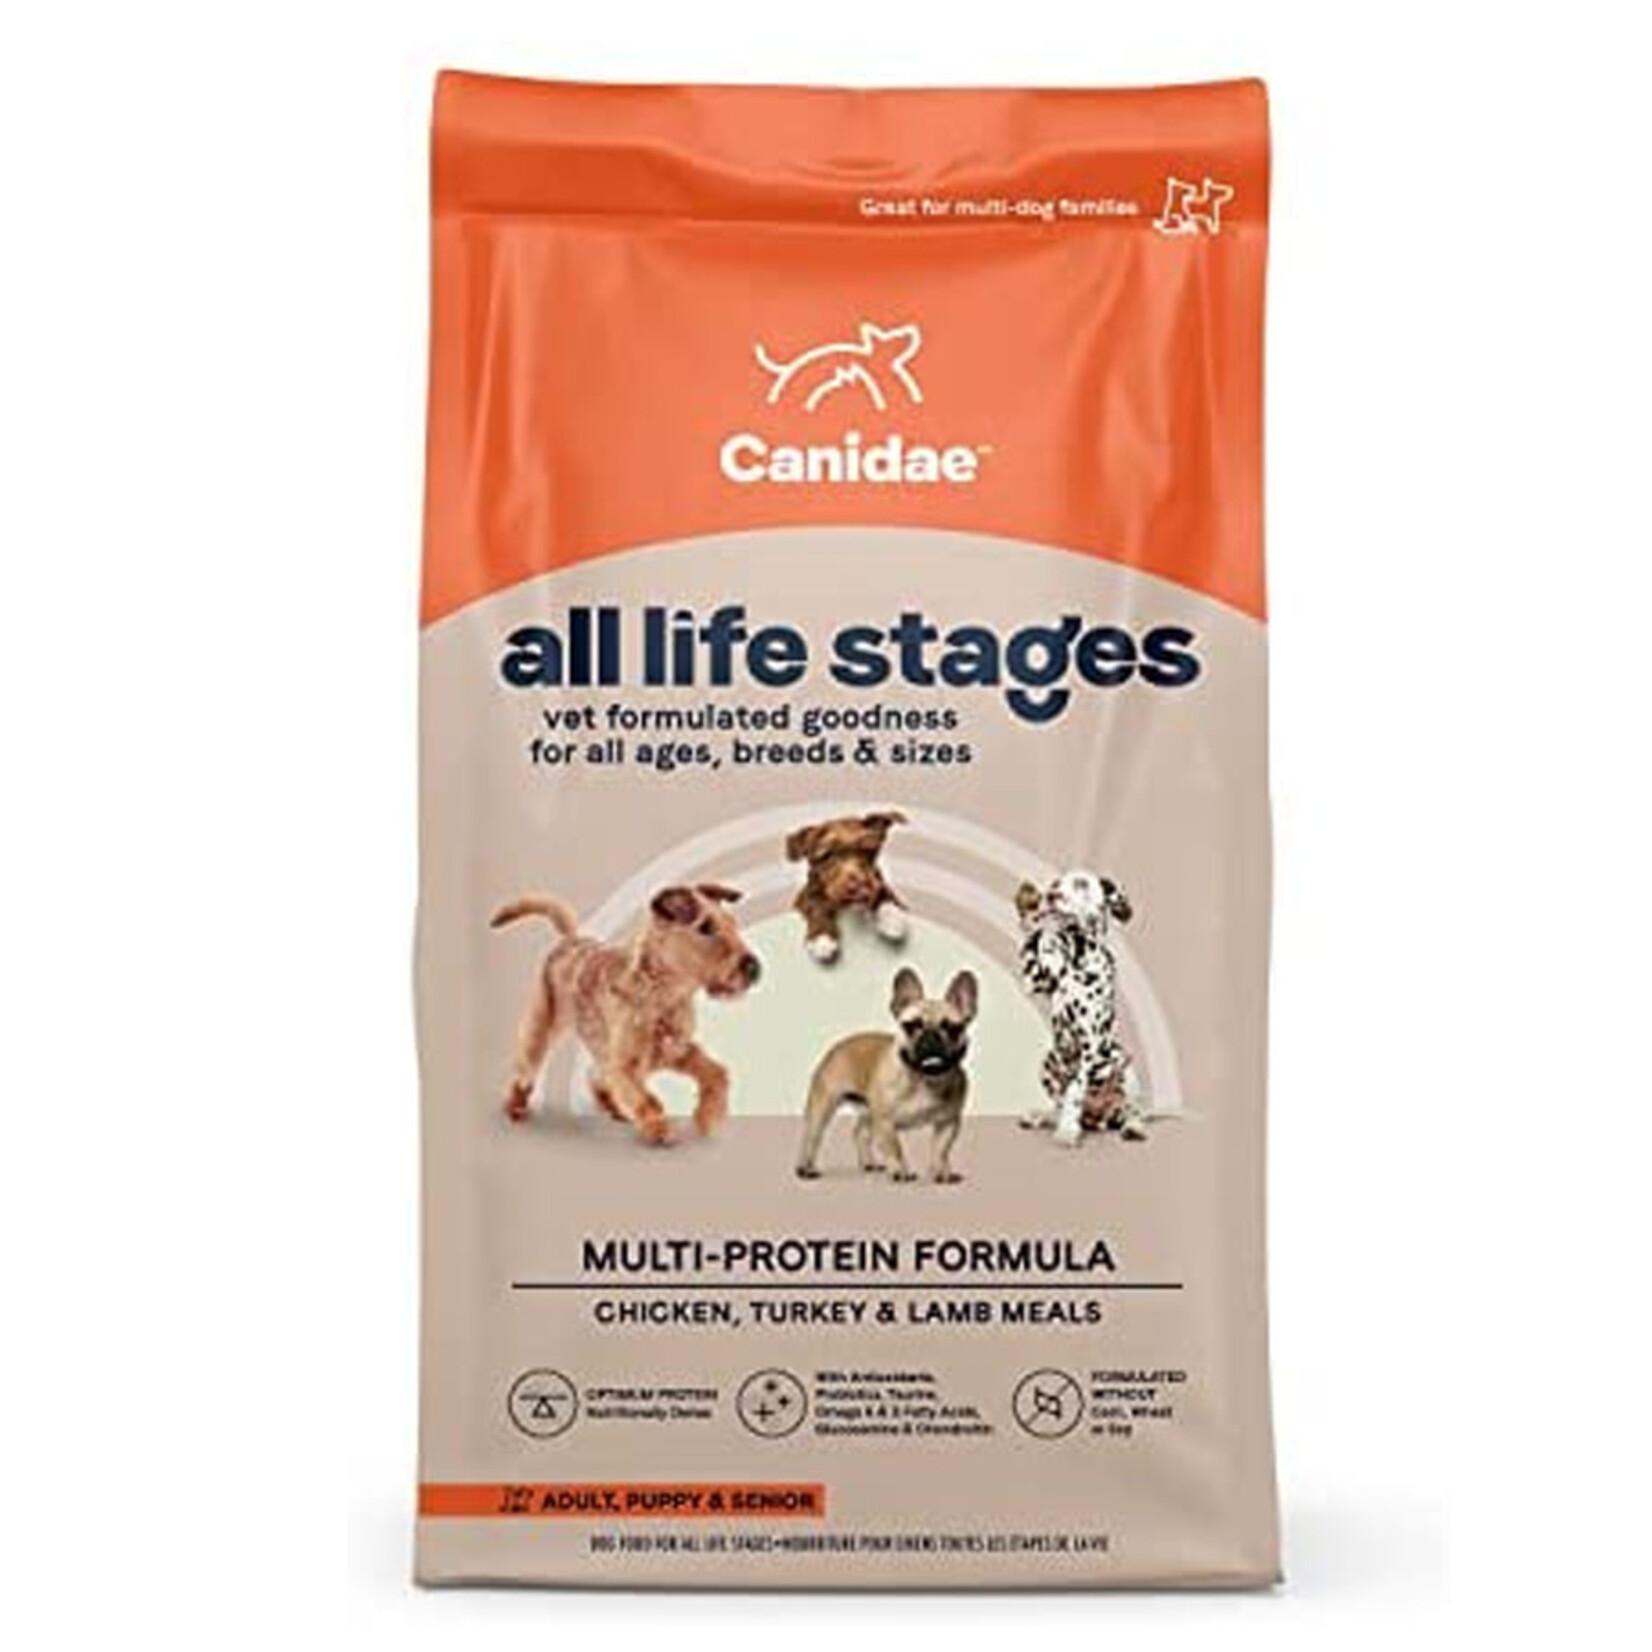 Canidae Canidae All Life Stages Multi Protein Formula Dog Food